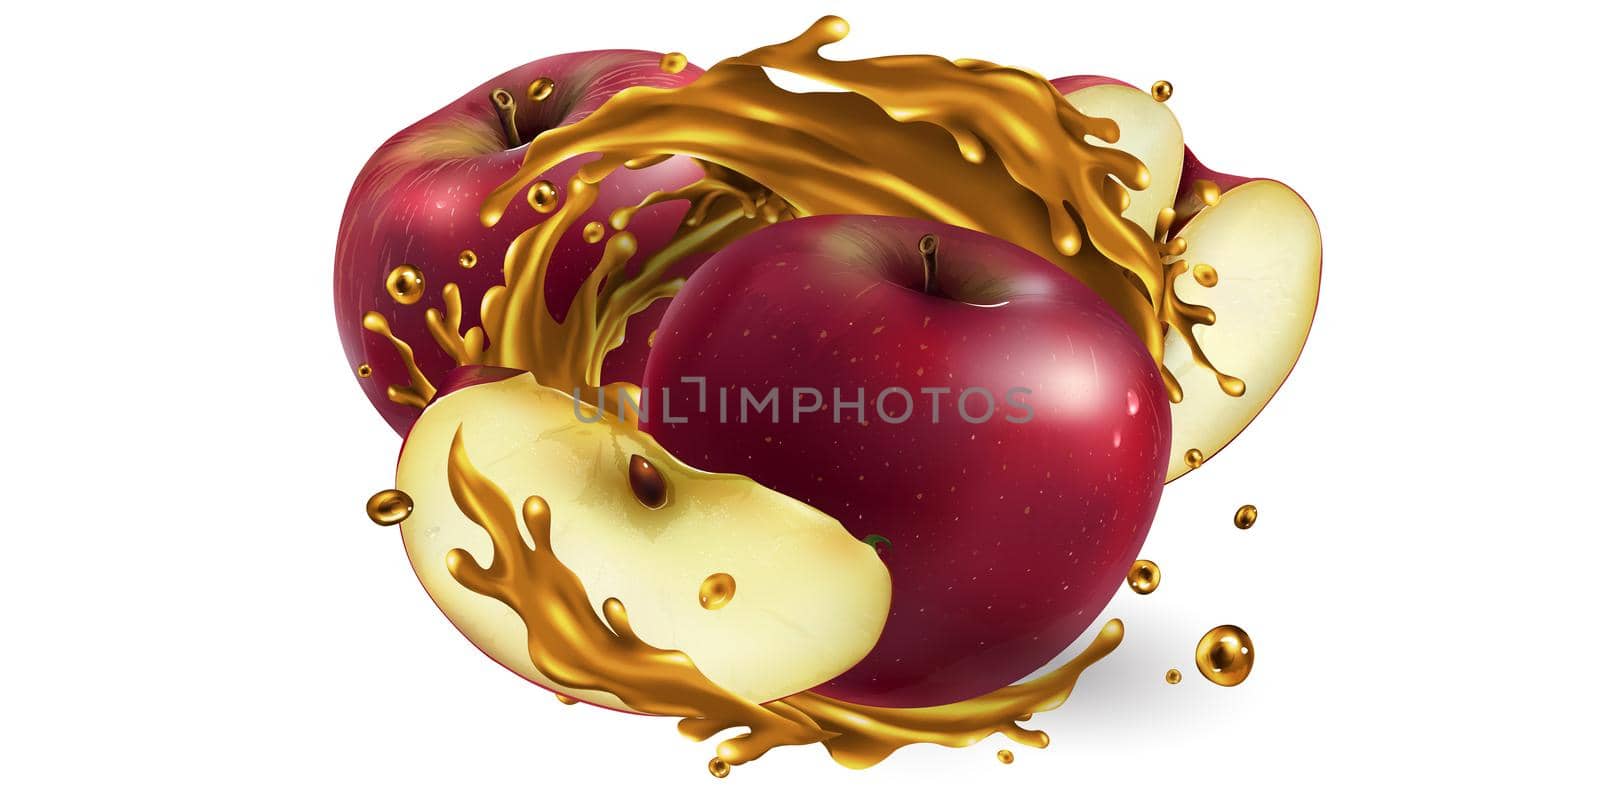 Fresh red apples and a splash of fruit juice on a white background. Realistic style illustration.